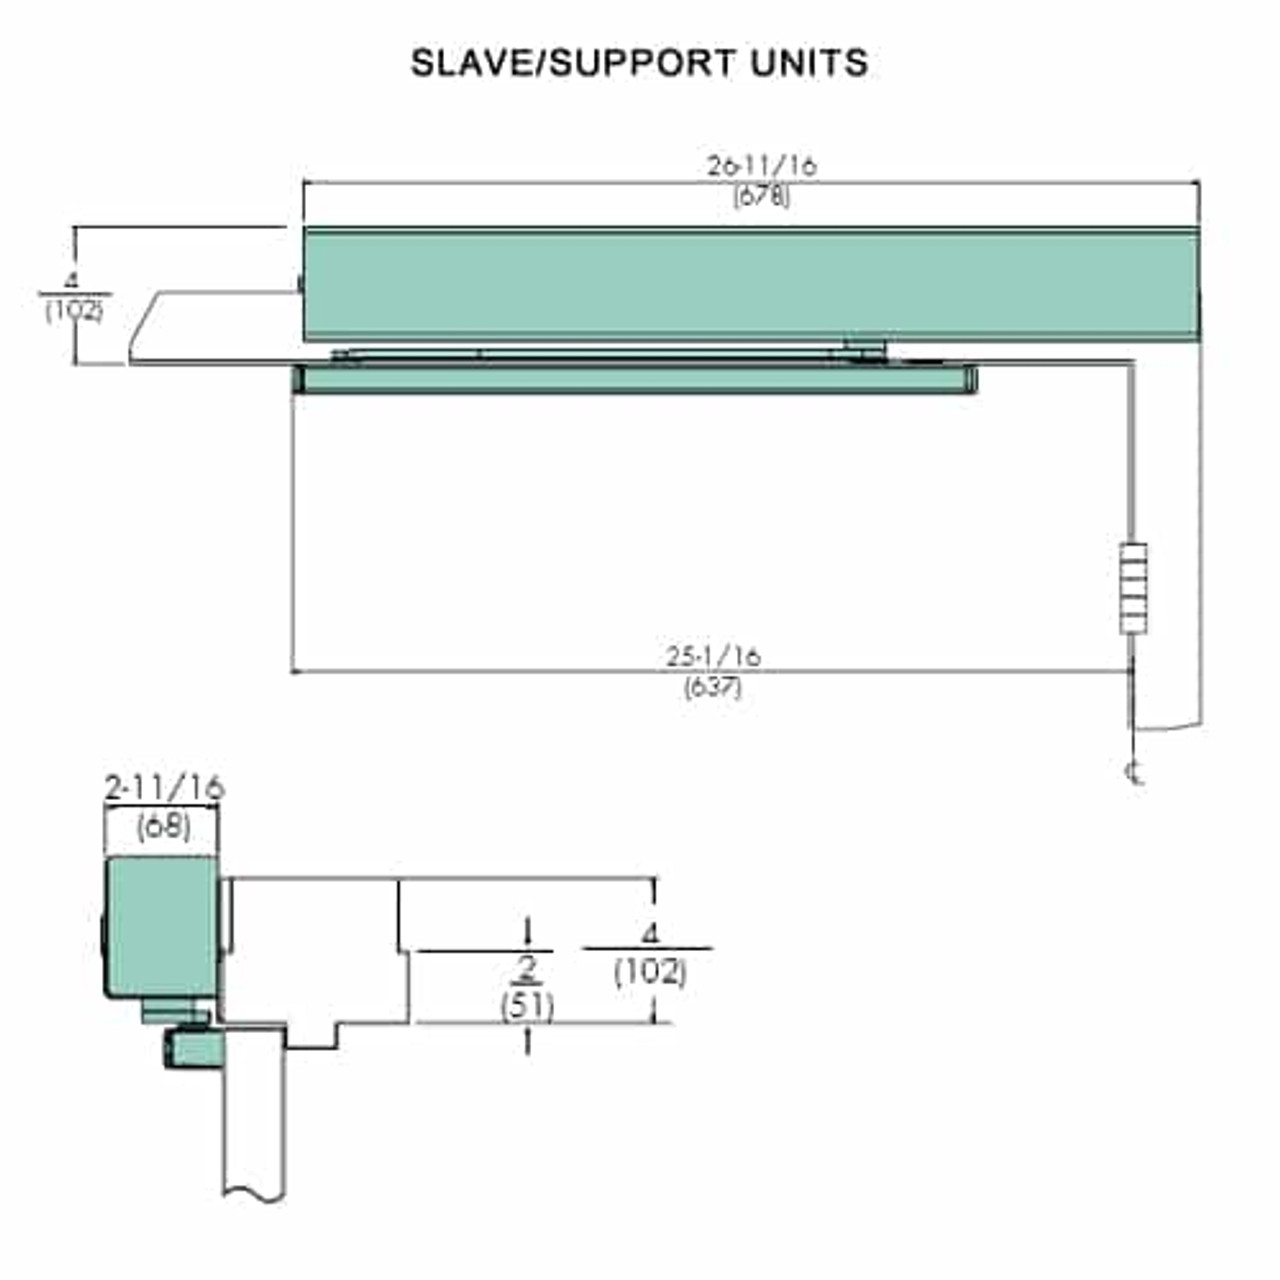 7255MPSO-RH-24VDC-690 Norton 7200 Series Electromechanical Closer and Holder with Double Egress Arm Slide Track Slave/Support Unit in Statuary Bronze Finish